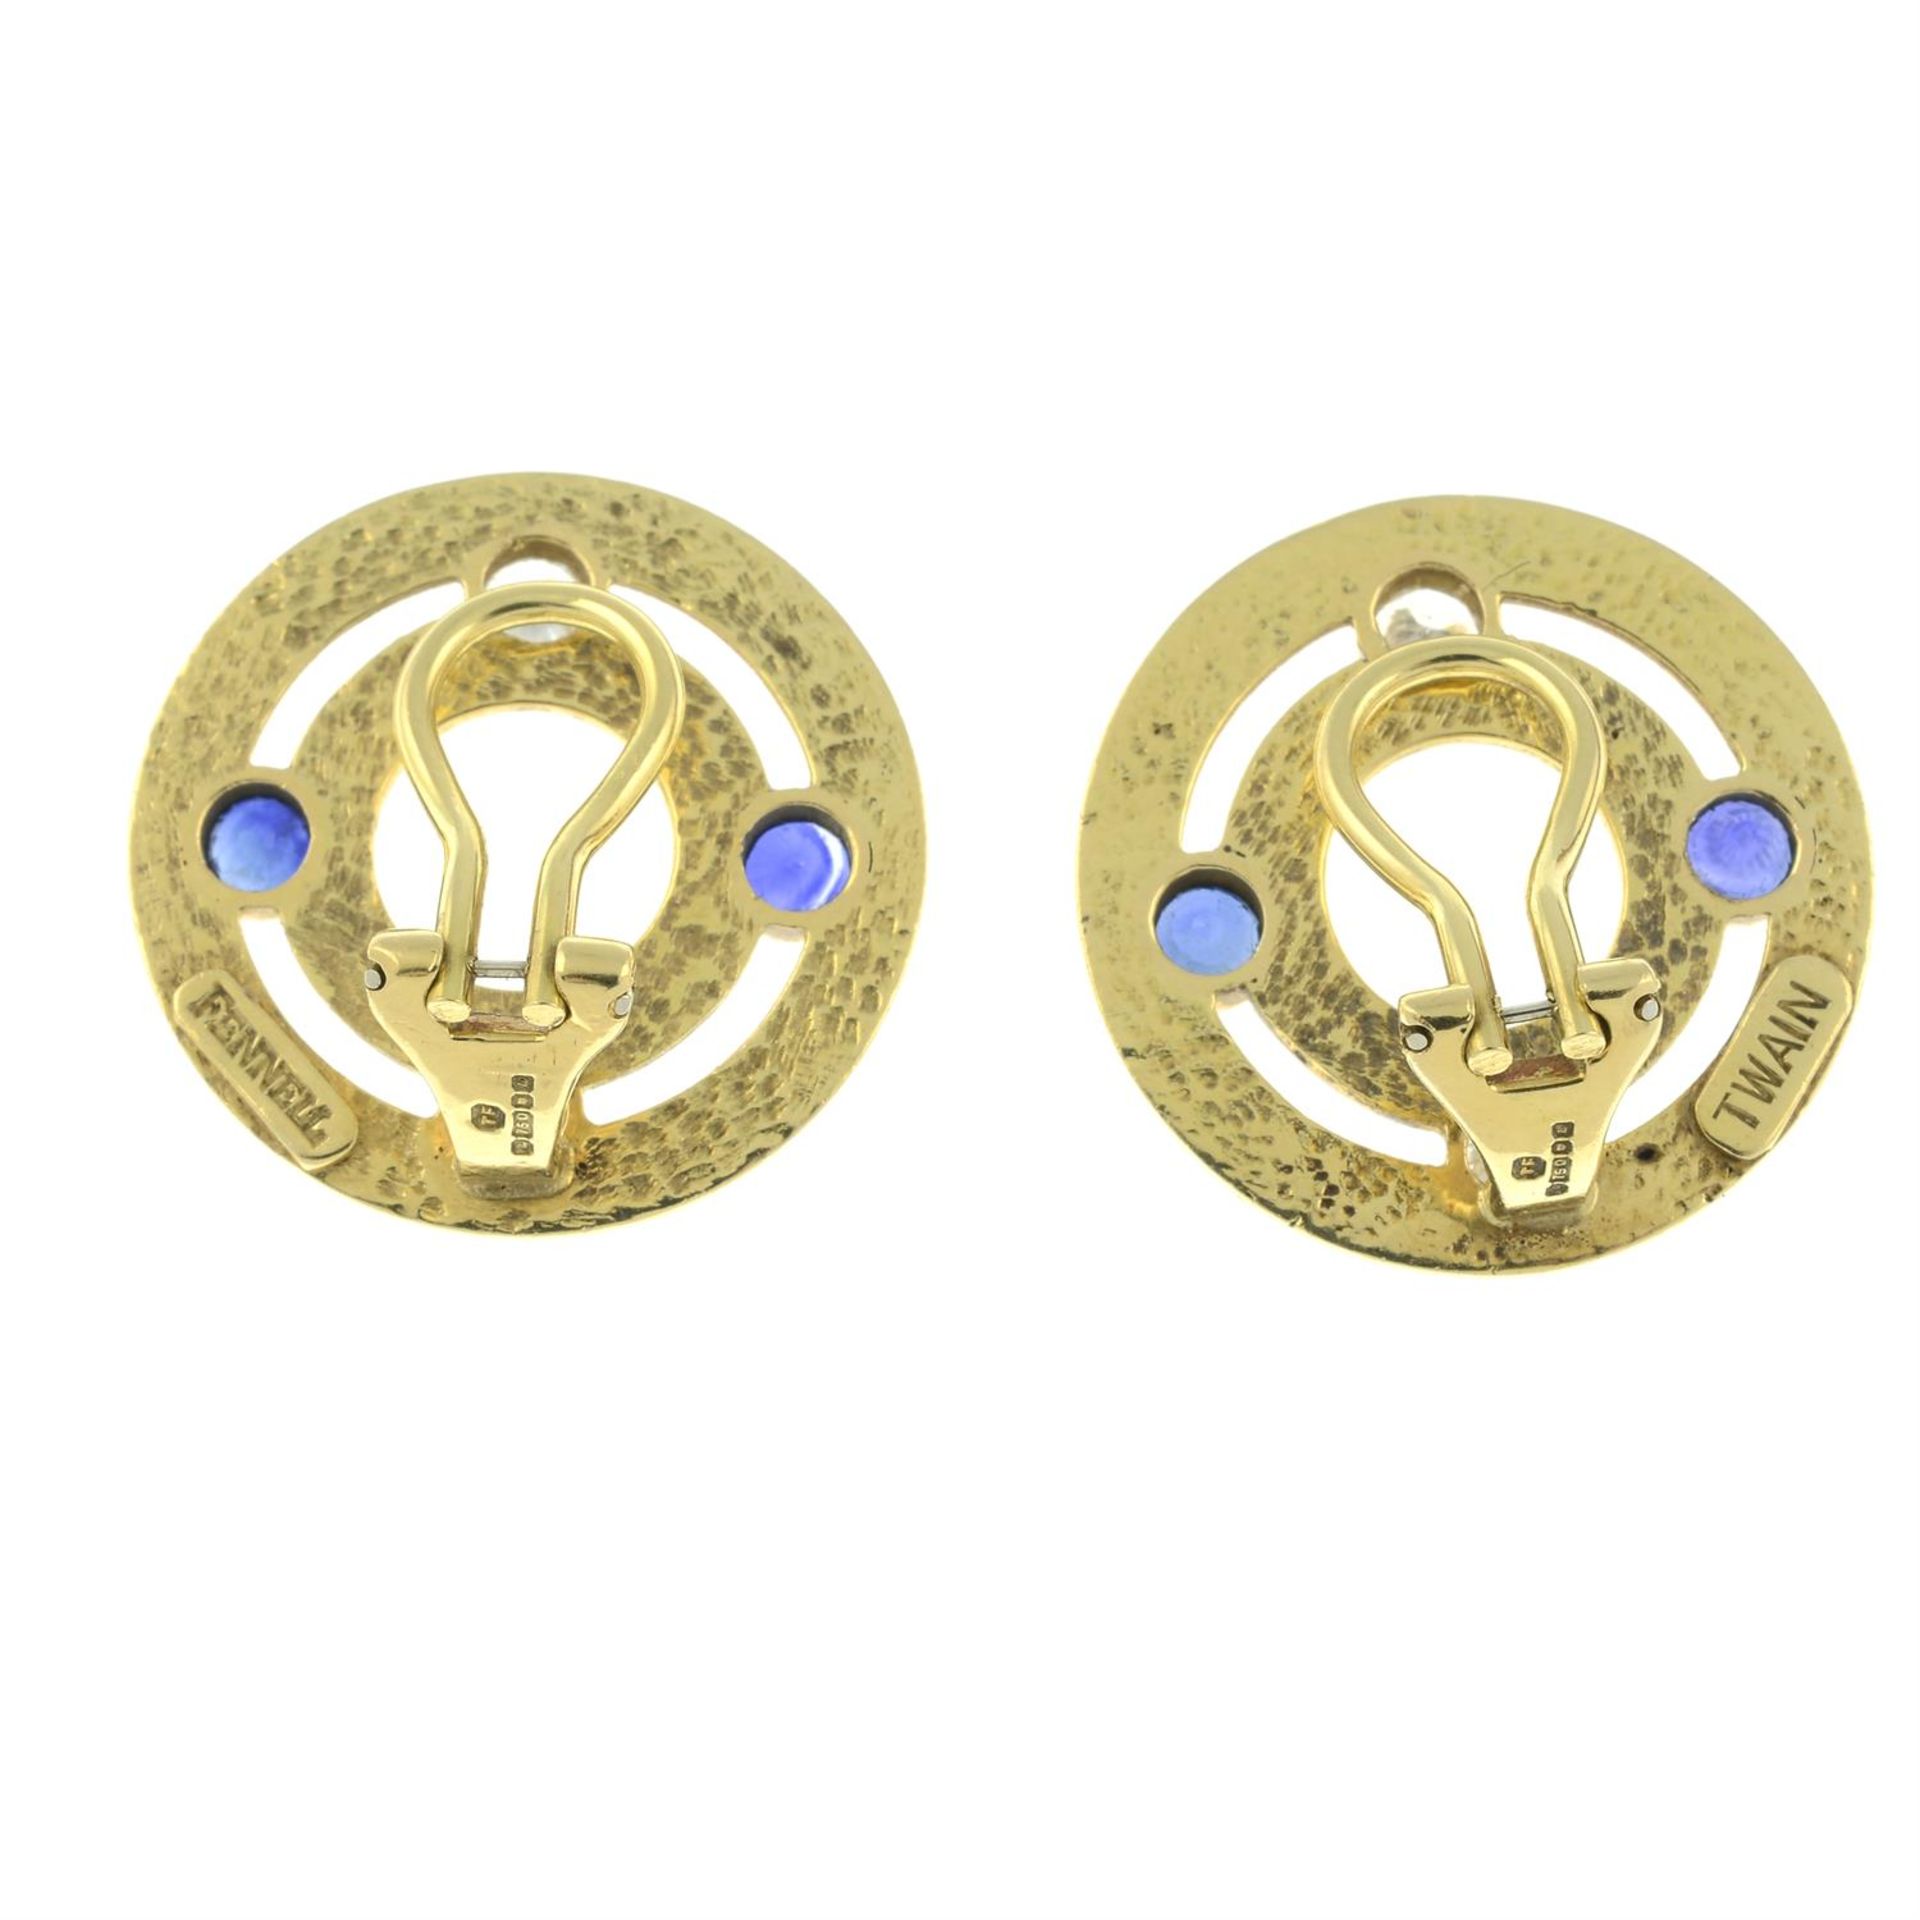 A pair of 18ct gold brilliant-cut diamond and sapphire 'Twain' earrings, by Theo Fennell. - Image 3 of 3